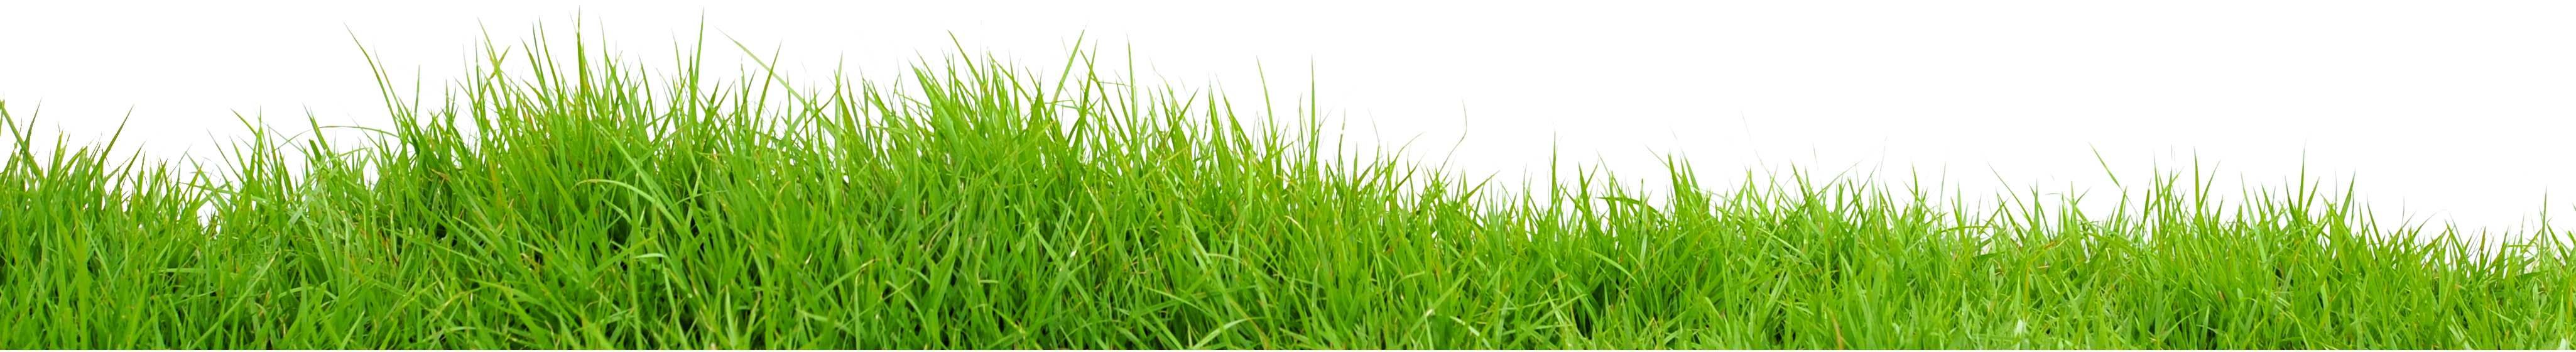 Free pictures download projects. Grass png images